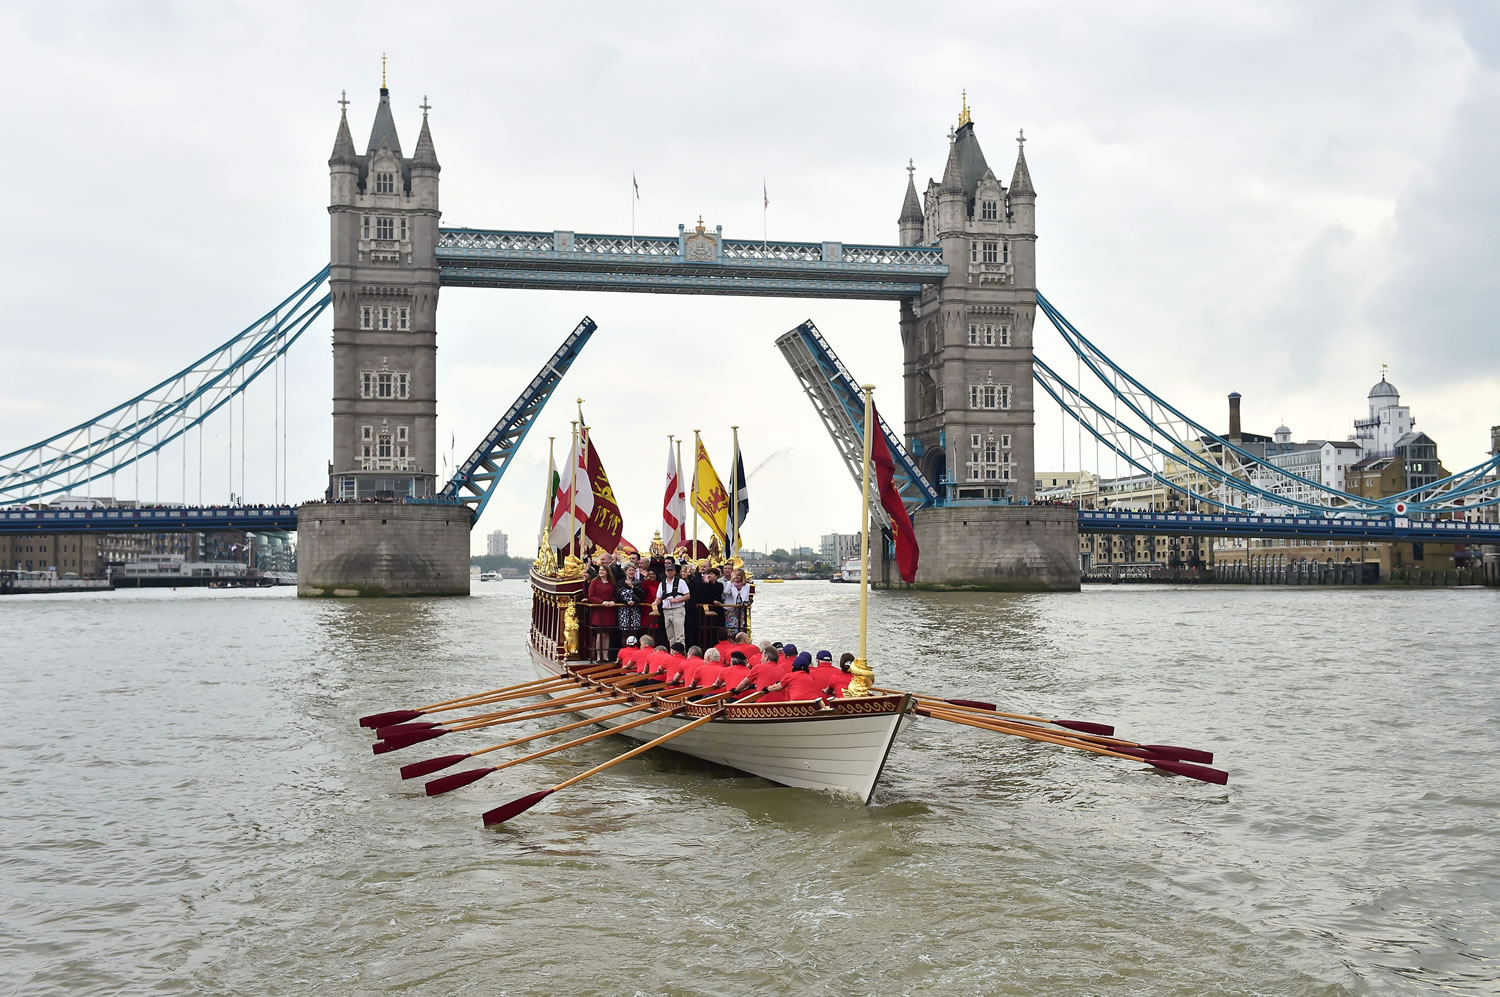 A Royal River Salute sails under Tower Bridge to celebrate Queen Elizabeth II becoming the longest reigning British monarch, in London on Wednesday.  The Queen on Wednesday became the longest ever reigning monarch in British history surpassing Queen Victoria who served for 63 years and seven months.